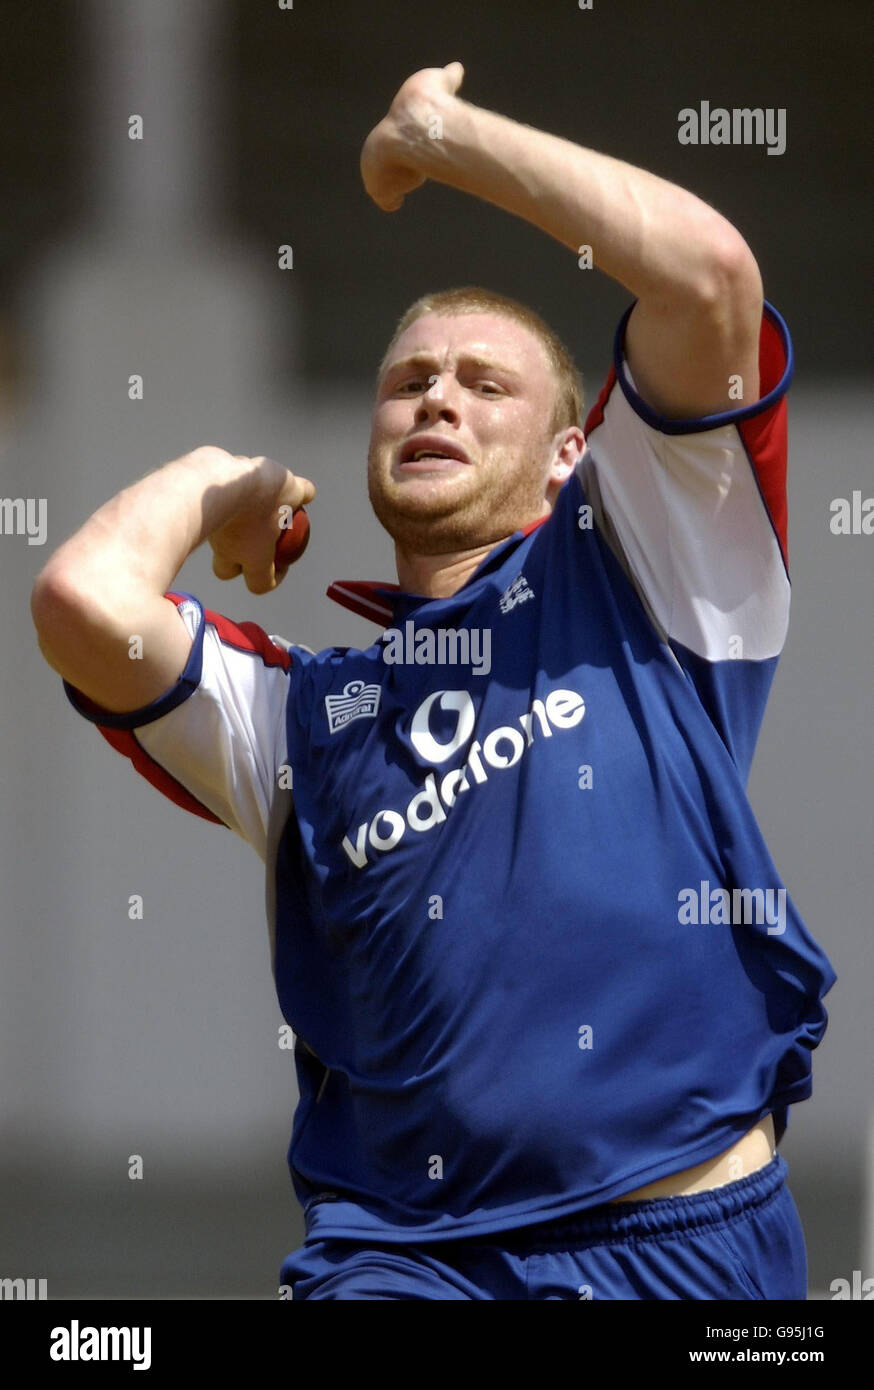 England cricketer Andrew Flintoff in action during net practice at the Cricket Club of India, Brabourne Stadium, Bombay, India, Friday February 17, 2006. PRESS ASSOCIATION Photo. Photo credit should read: Rebecca Naden/PA. Stock Photo